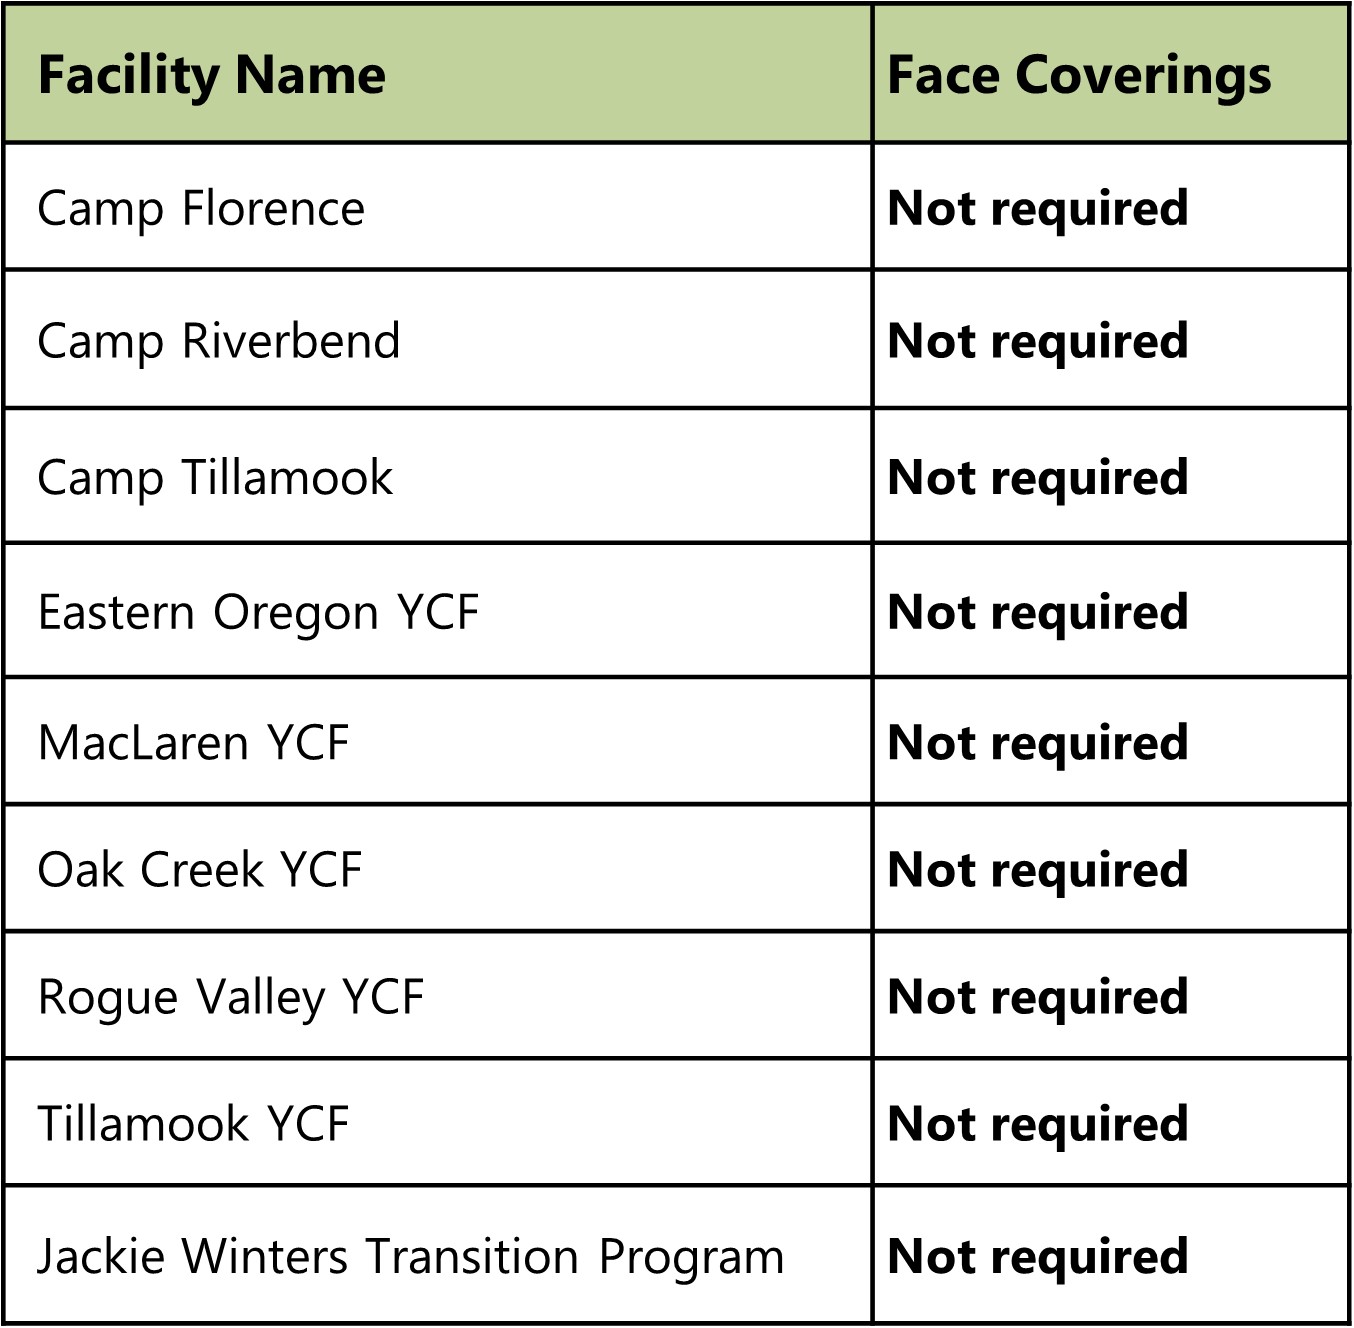 Chart showing that face coverings are not required at all facilities